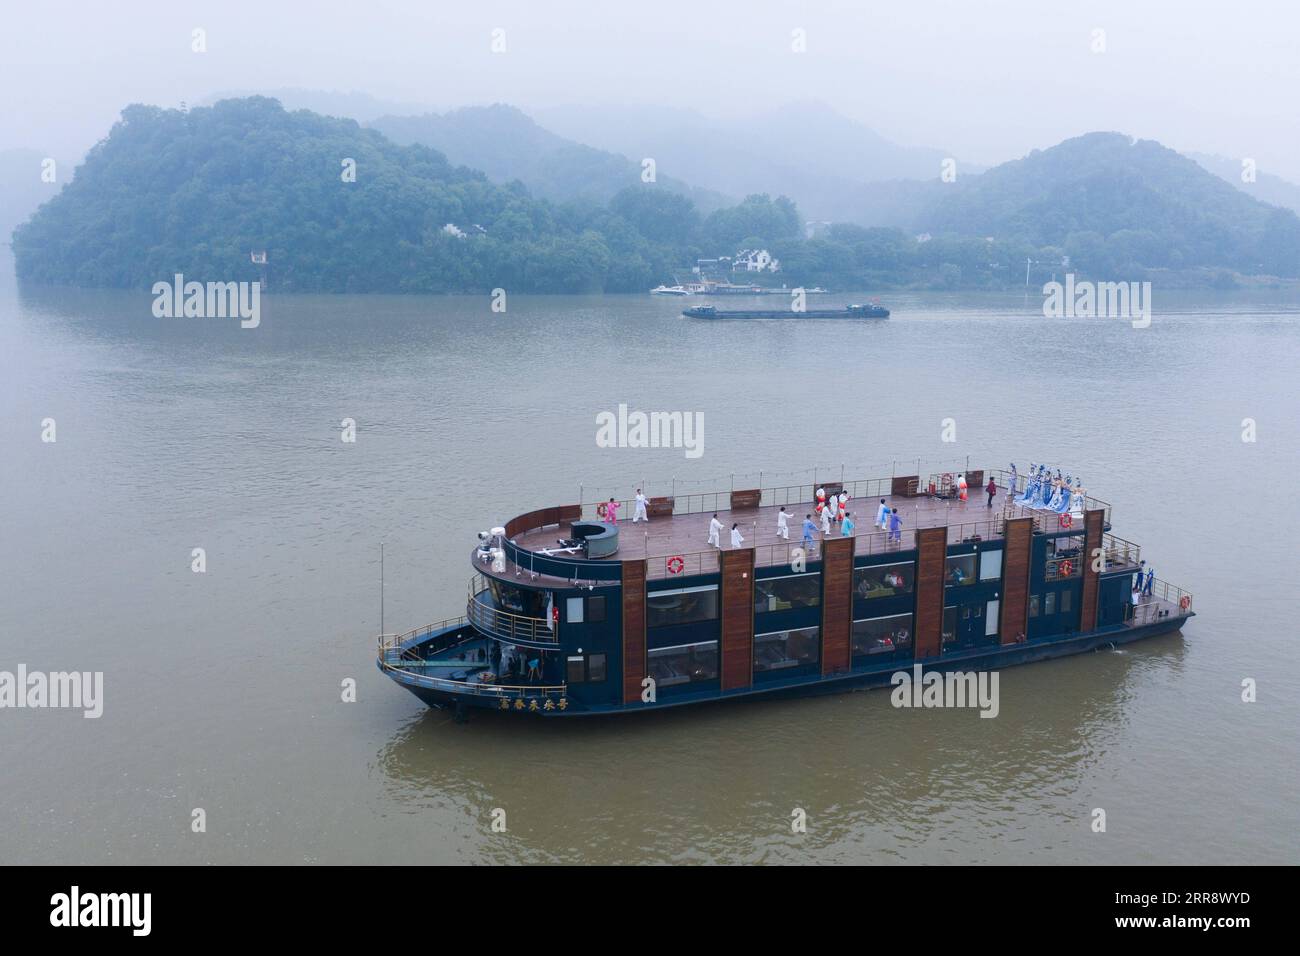 210519 -- TONGLU, May 19, 2021 -- Aerial photo taken on May 19, 2021 shows senior hobbyists of Taijiquan, a traditional Chinese martial art, demonstrating Taijiquan moves on a boat in Fuchunjiang River in Tonglu County, east China s Zhejiang Province. A nation-wide campaign to promote and demonstrate Taijiquan as a fitness exercise among senior citizens was launched here on Wednesday. More than 2,000 Taijiquan hobbyists from all over the country flocked in to participate in the demonstrations and performances.  CHINA-ZHEJIANG-TONGLU-TAIJIQUAN FITNESS EXERCISESCN XuxYu PUBLICATIONxNOTxINxCHN Stock Photo